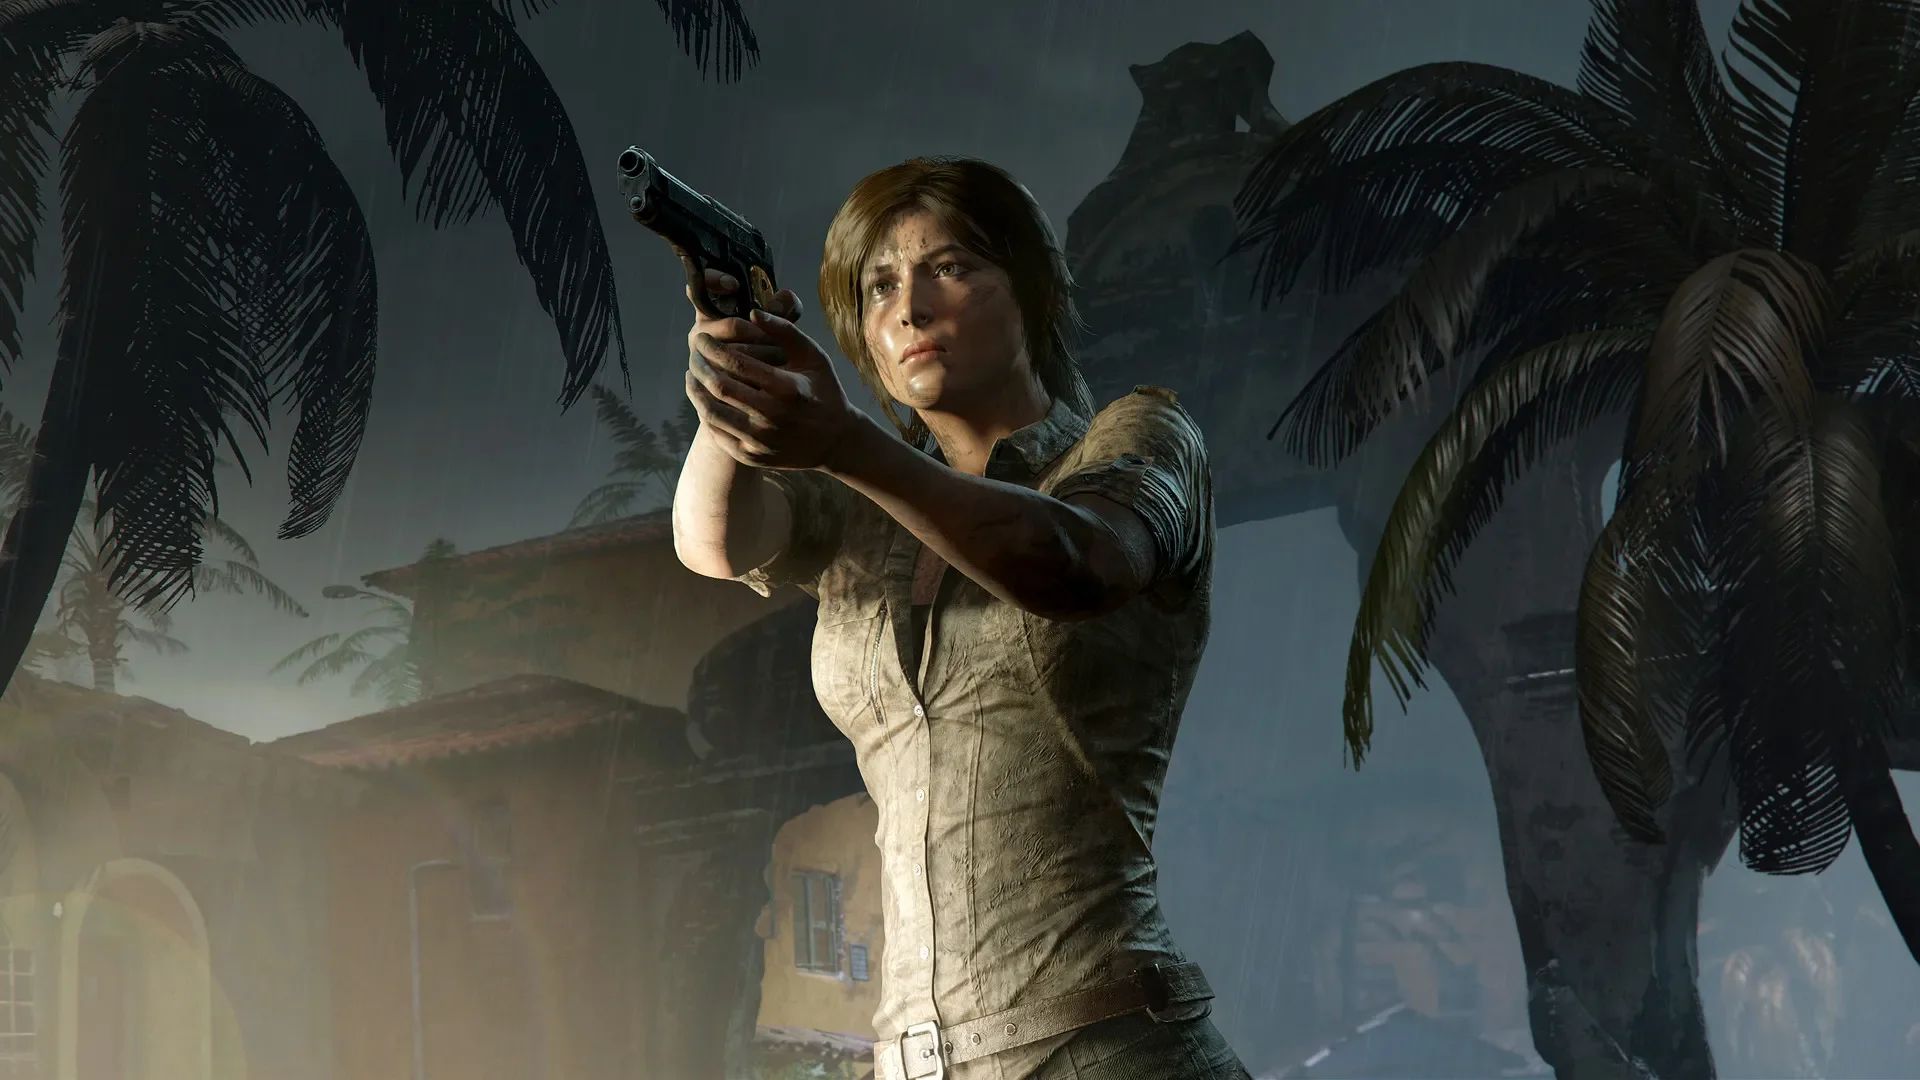 Lara Croft is coming to Call of Duty multiplayer